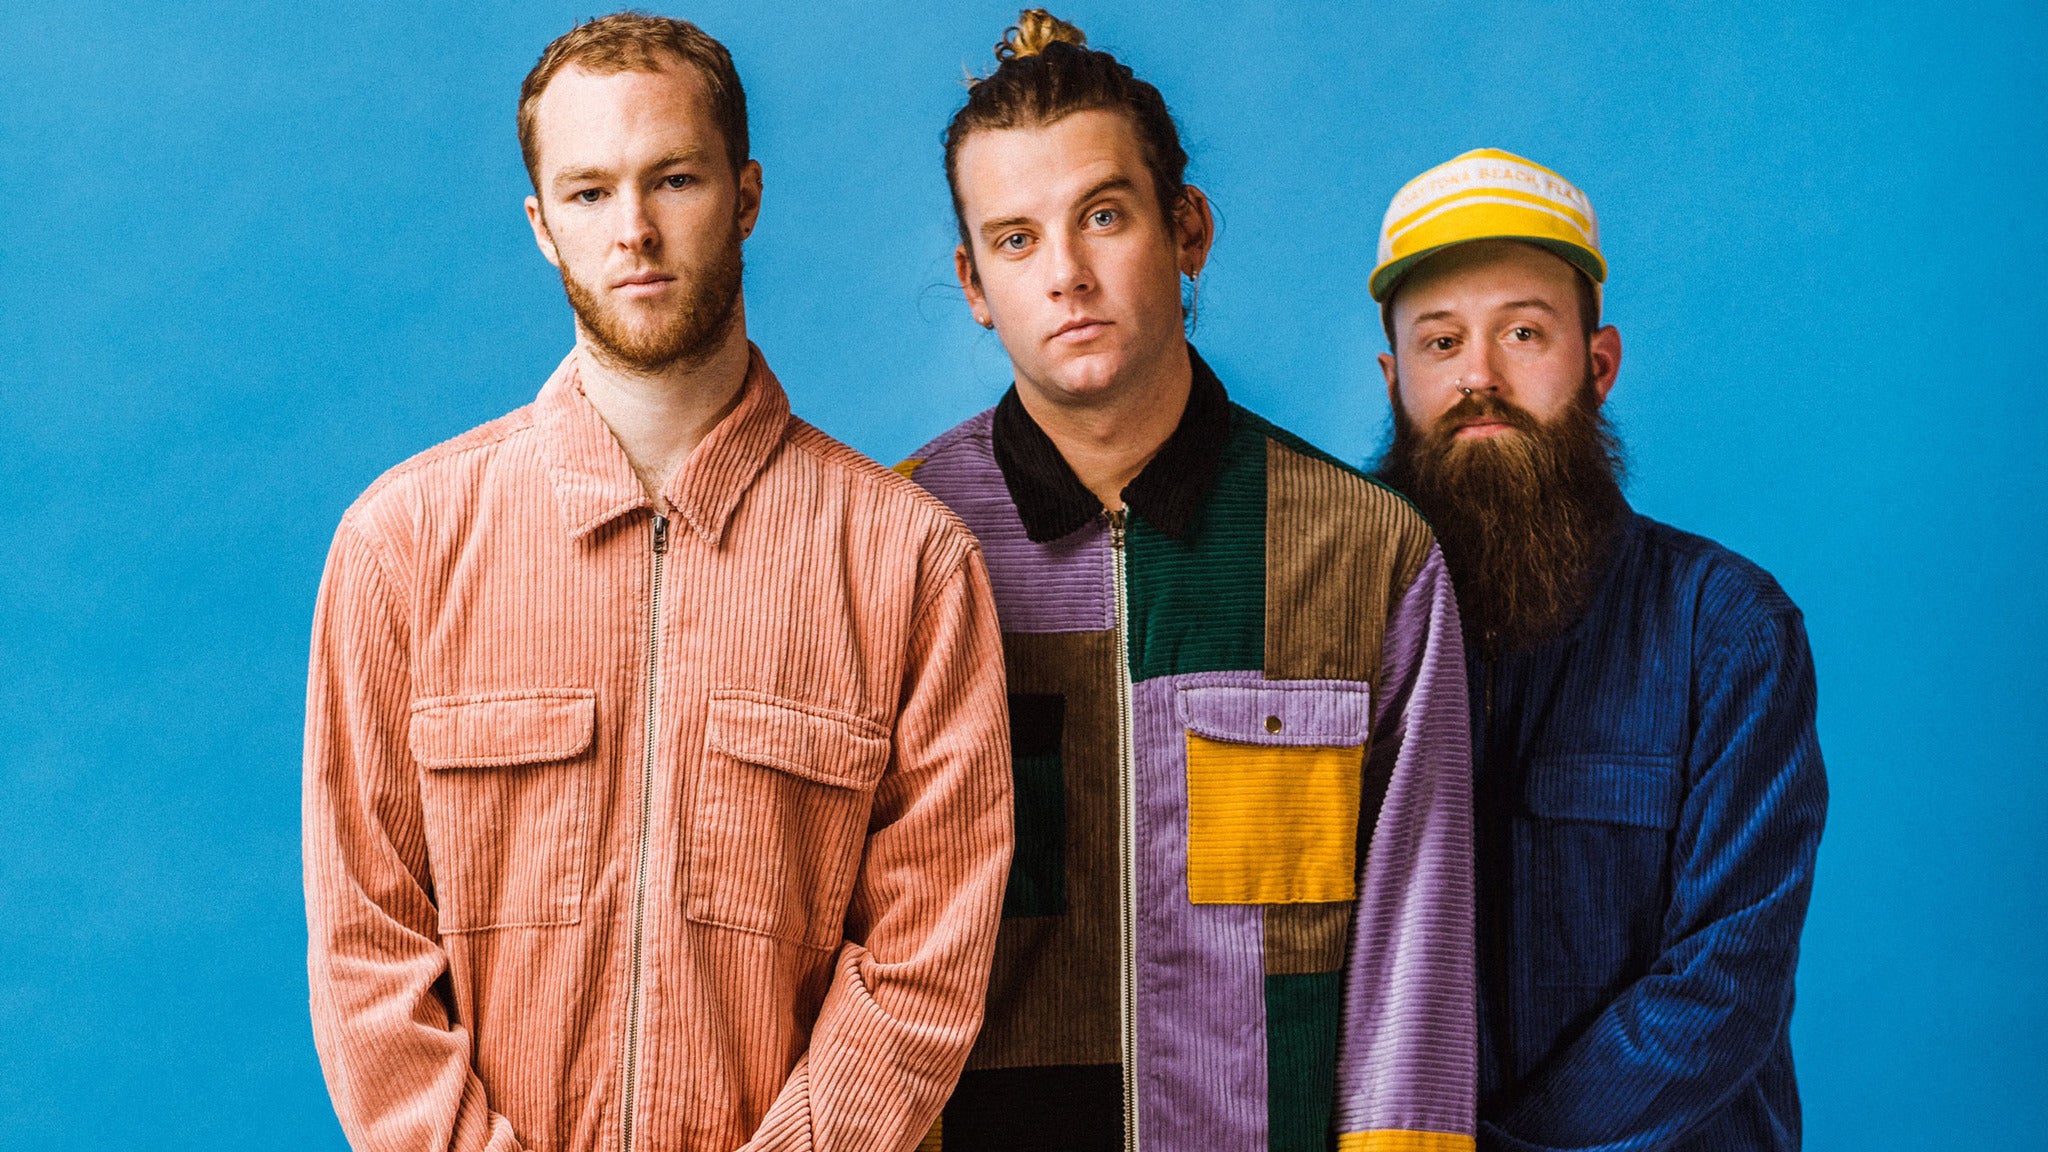 Radio 104.5 Presents Judah & the Lion - Going to Mars Tour in Philadelphia promo photo for Fan Club presale offer code